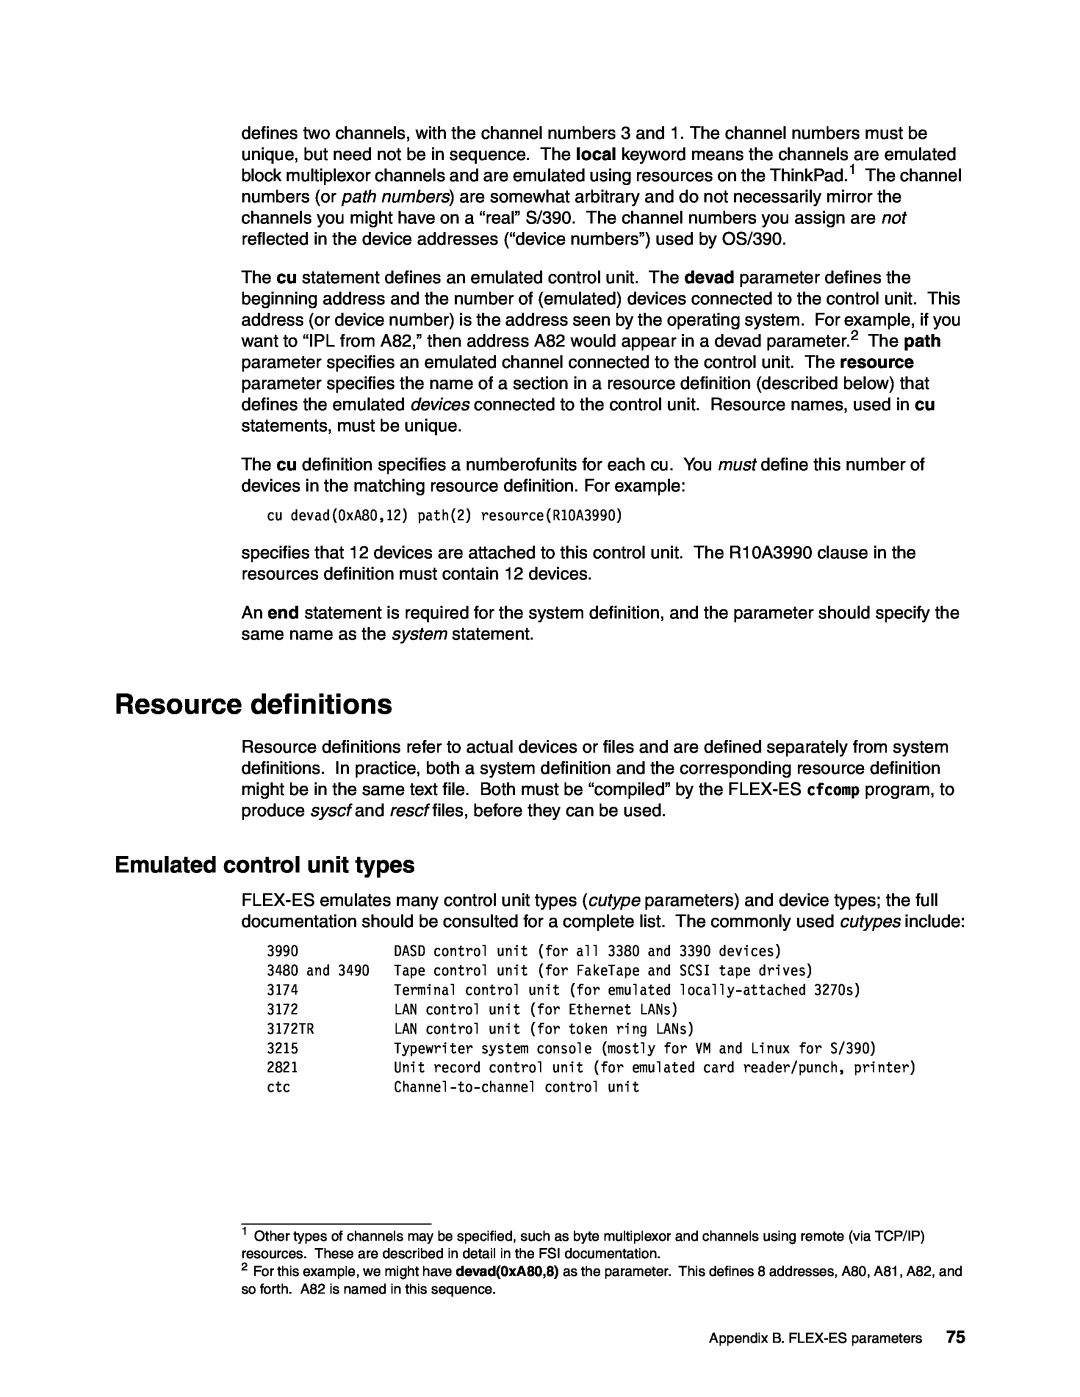 IBM s/390 manual Resource definitions, Emulated control unit types 